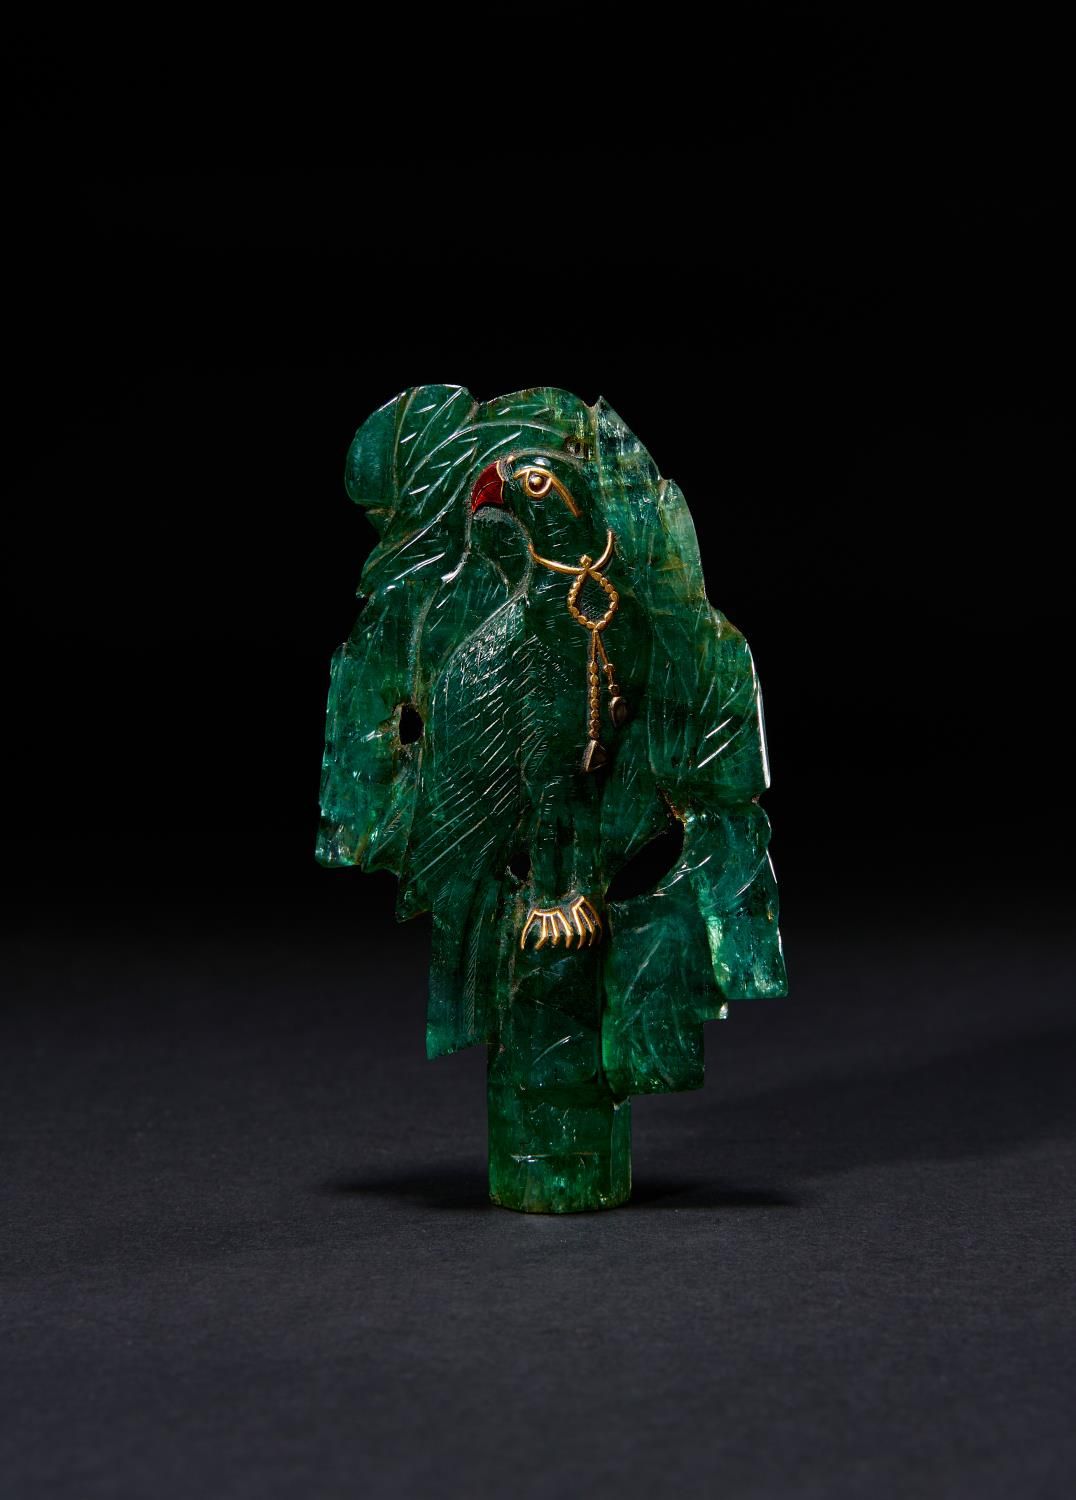 A LARGE CARVED MUGHAL EMERALD IN THE FORM OF A PARROT, 18TH/19TH CENTURY, MUGHAL&hellip;